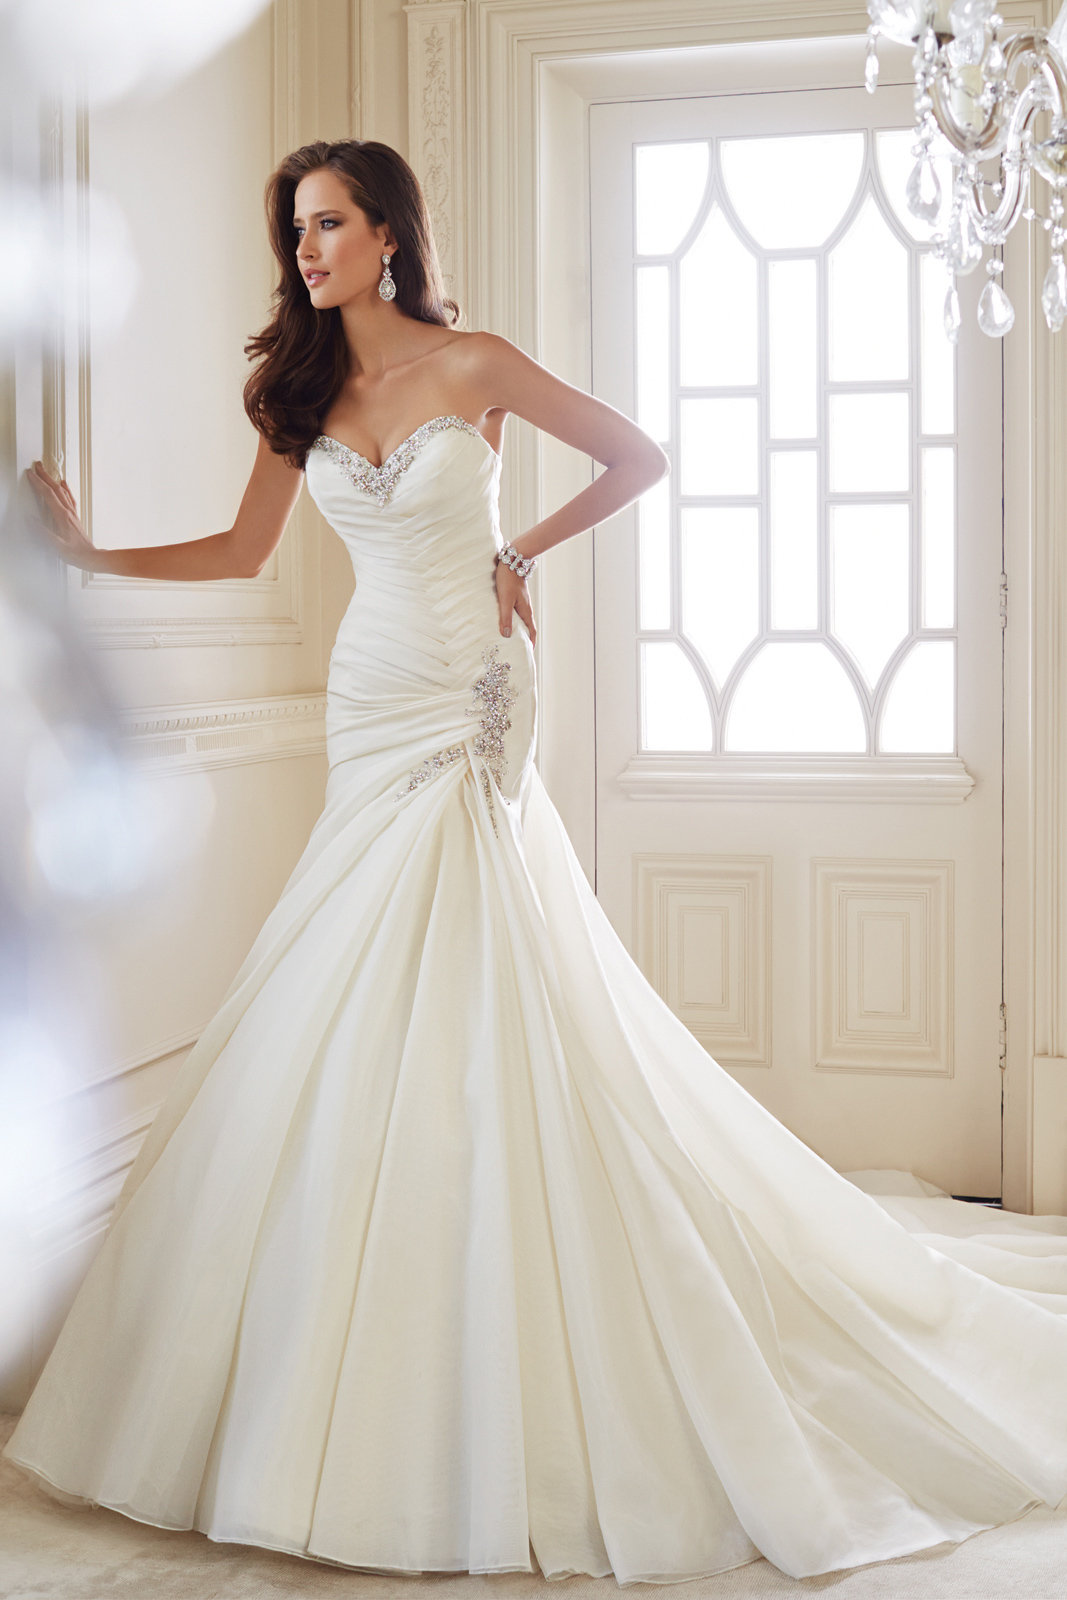 The 25 Most Popular Wedding Gowns of ...